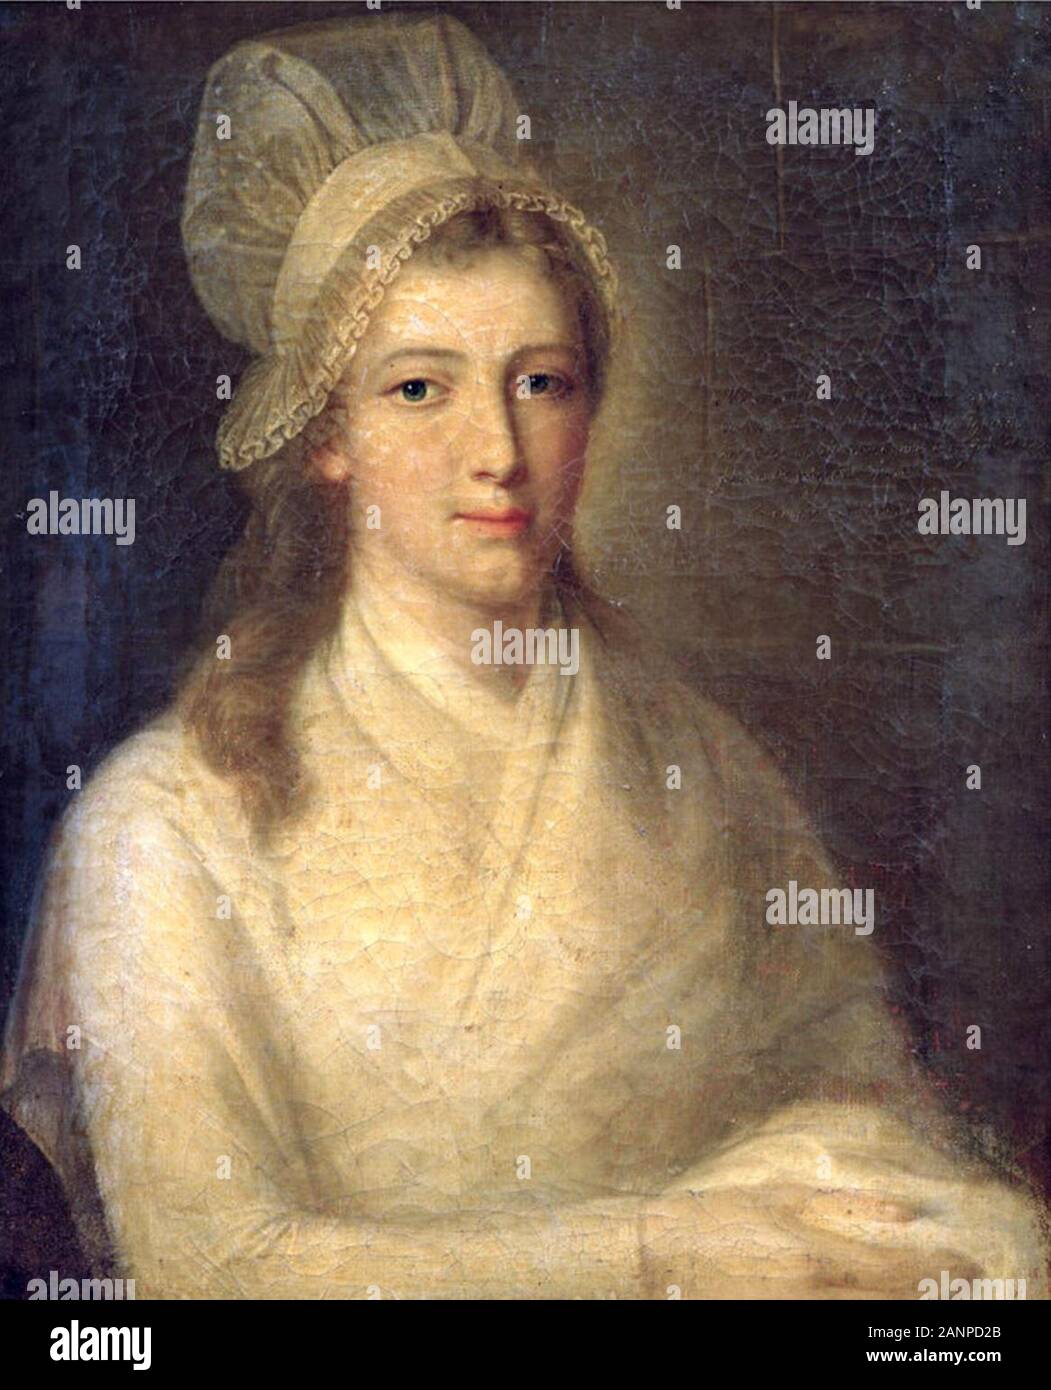 Charlotte Corday, Marie-Anne Charlotte de Corday d'Armont (1768 – 1793), known as Charlotte Corday, figure of the French Revolution. Stock Photo